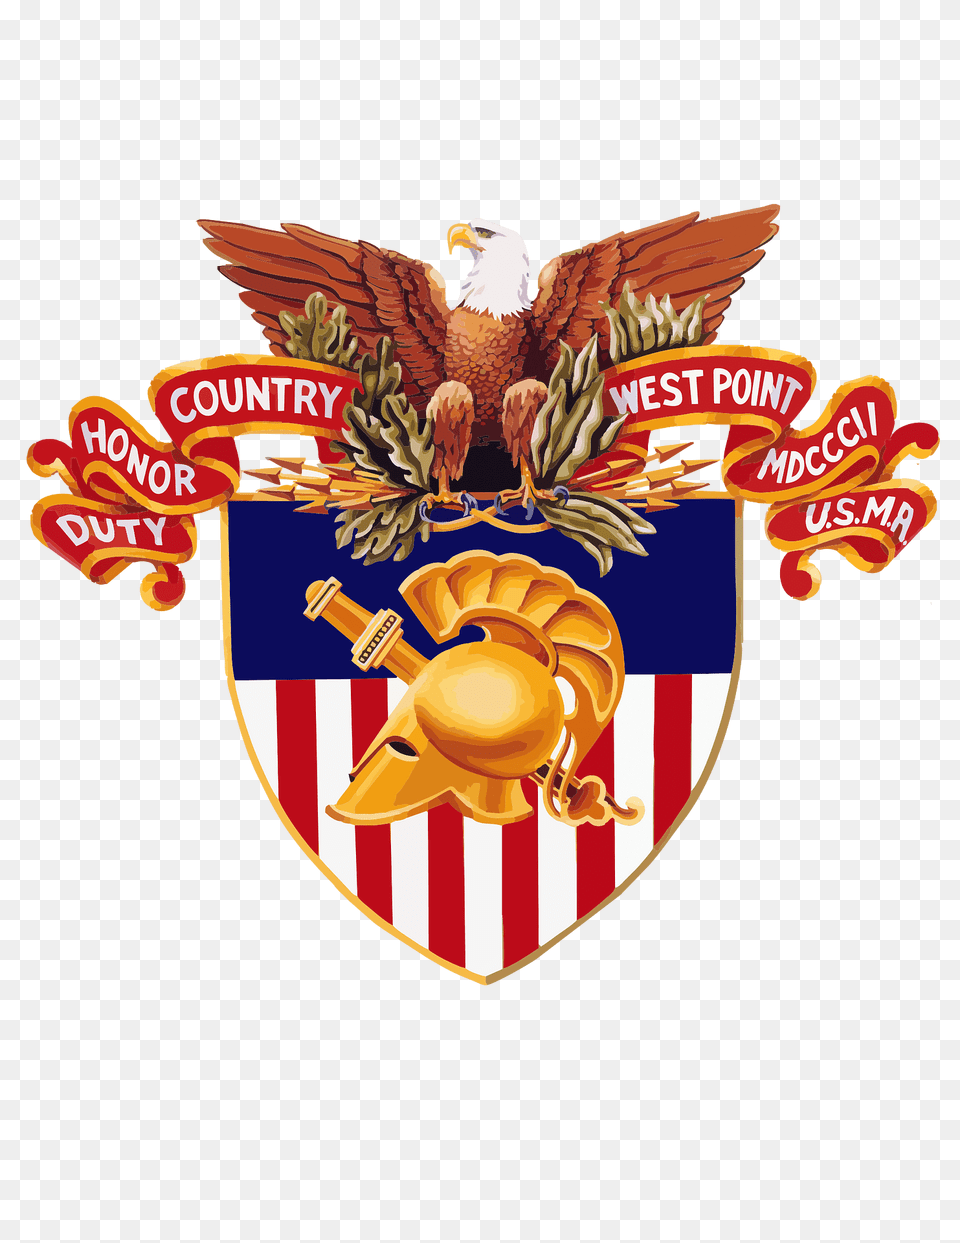 United States Military Academy Coat Of Arms Clipart, Emblem, Symbol, Logo, Badge Png Image